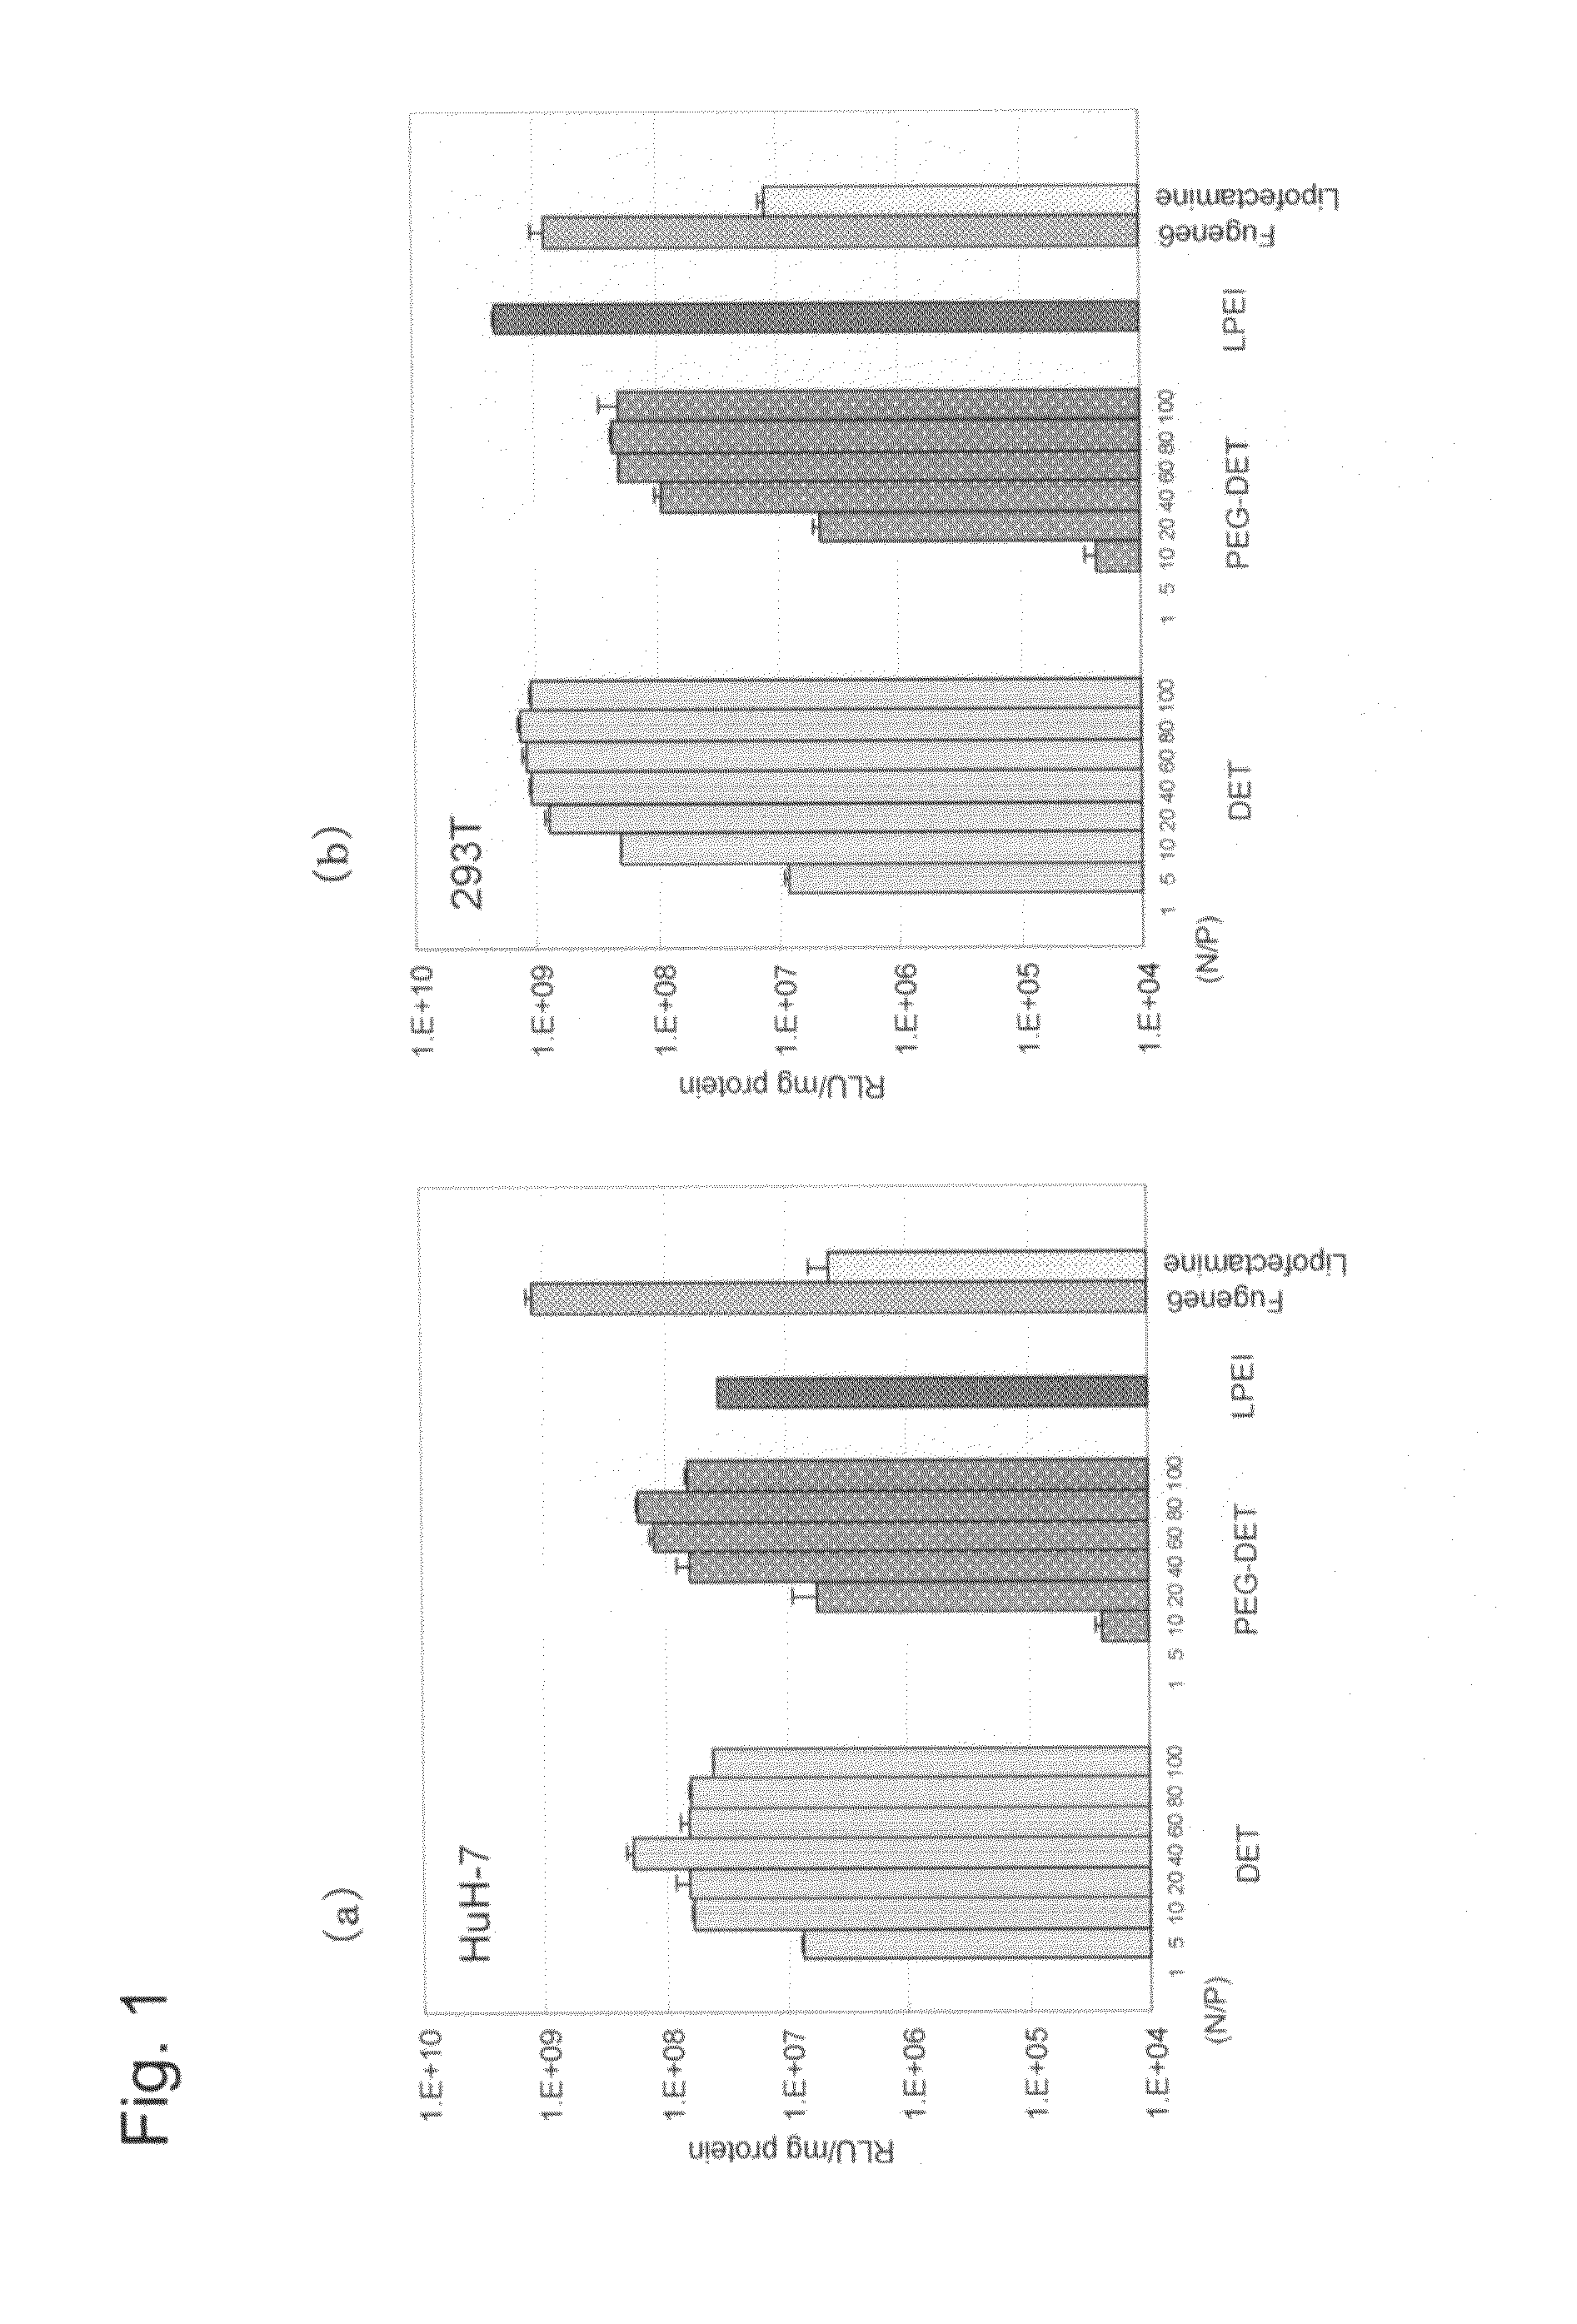 Polycationically charged polymer and the use of the same as a carrier for nucleic acid